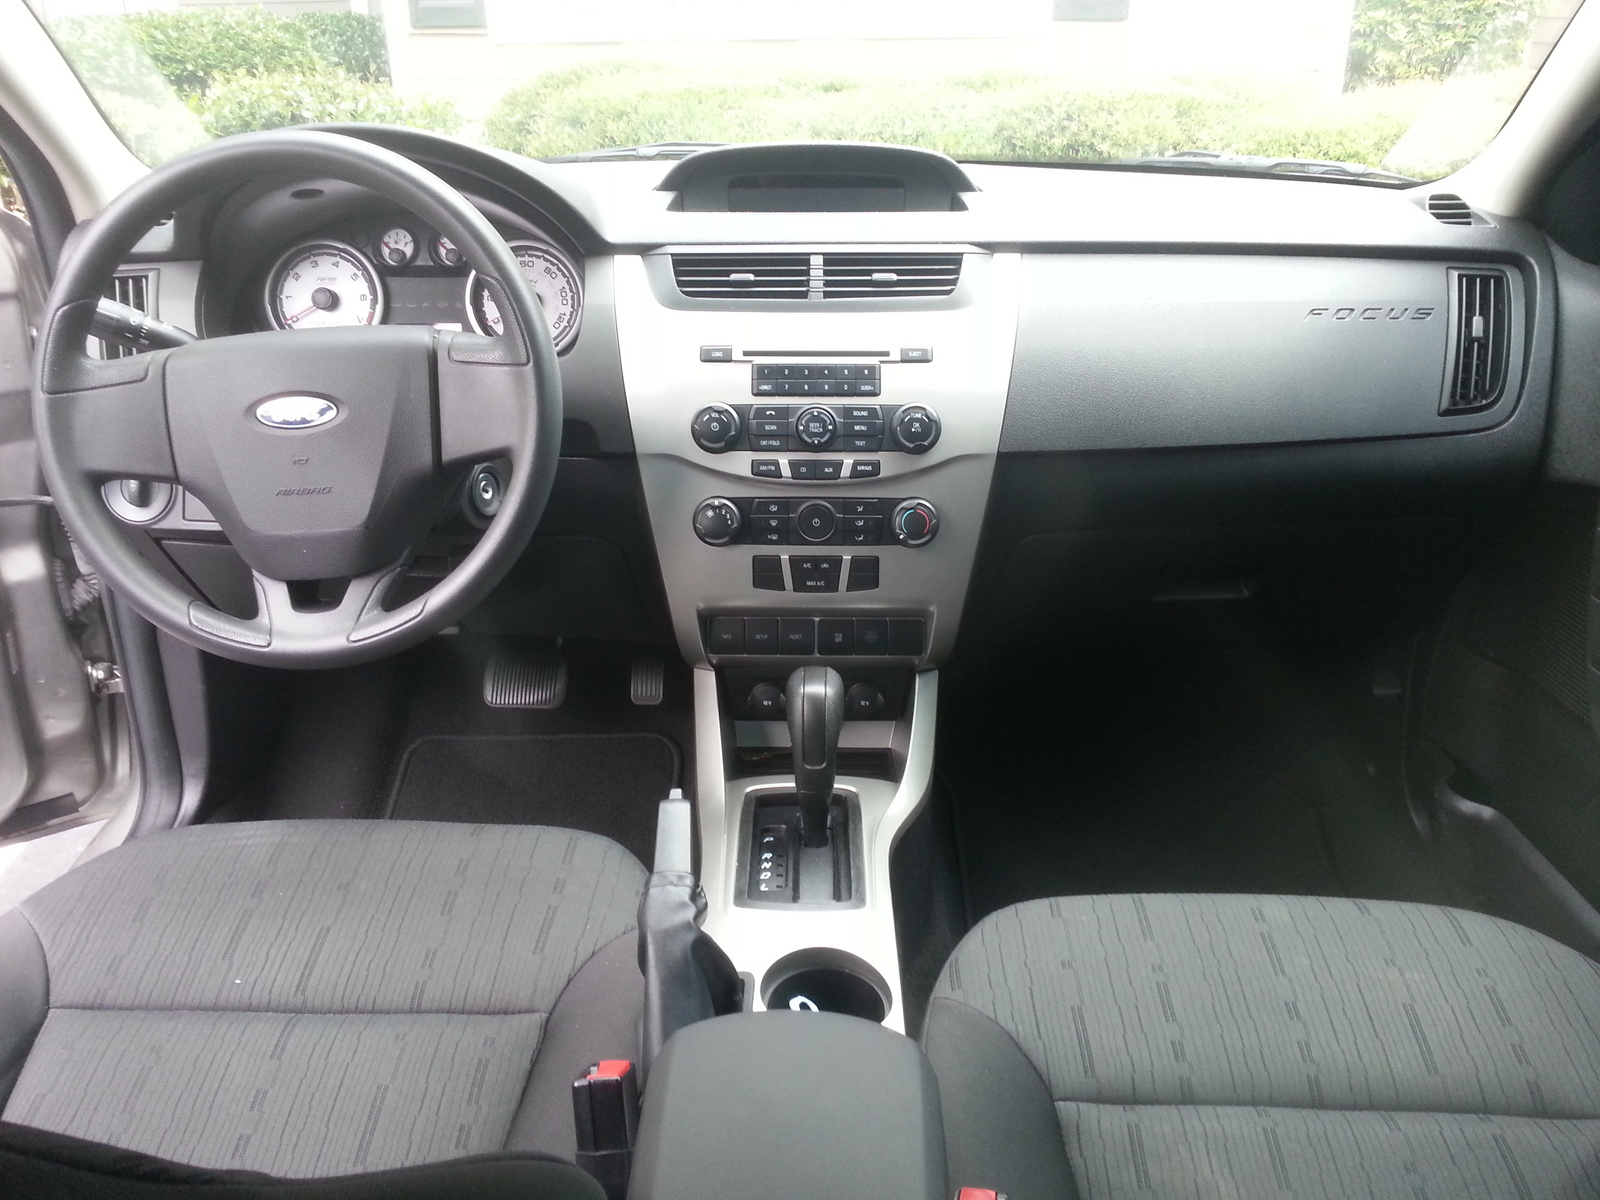 2008 Ford focus abs standard #7